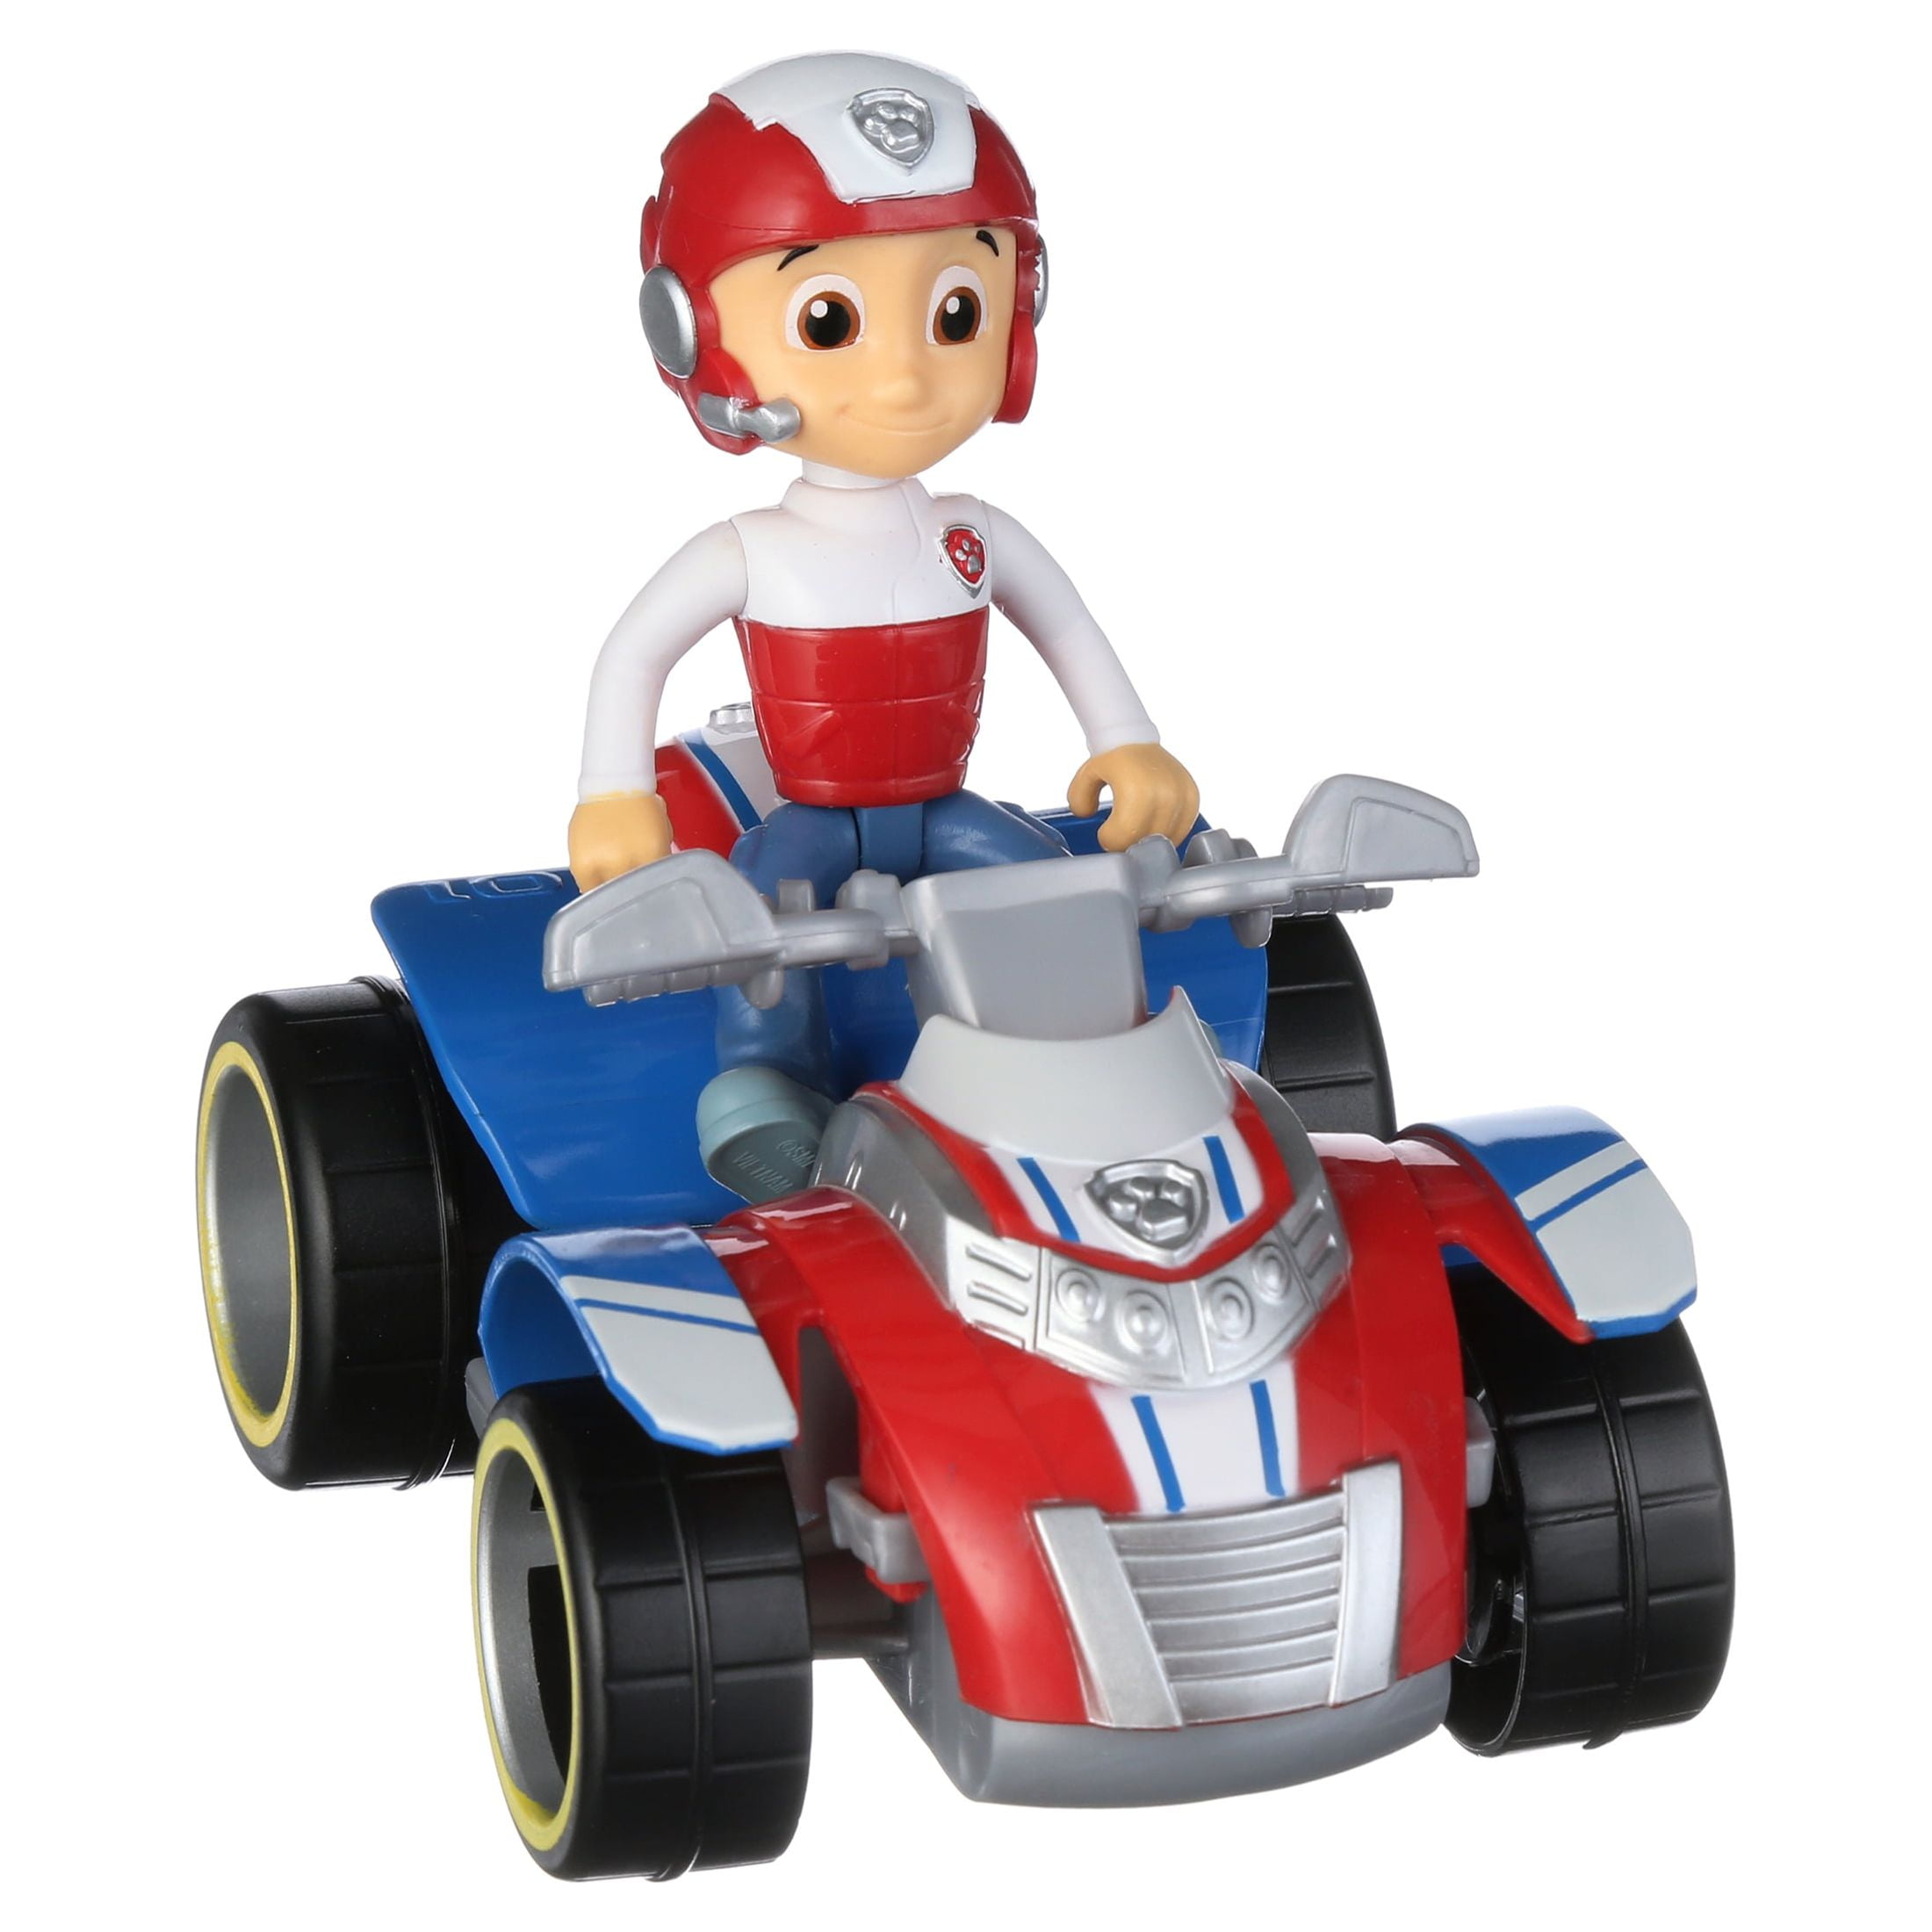 Paw Patrol 6060222 Ryders Rescue ATV Vehicle with Collectible